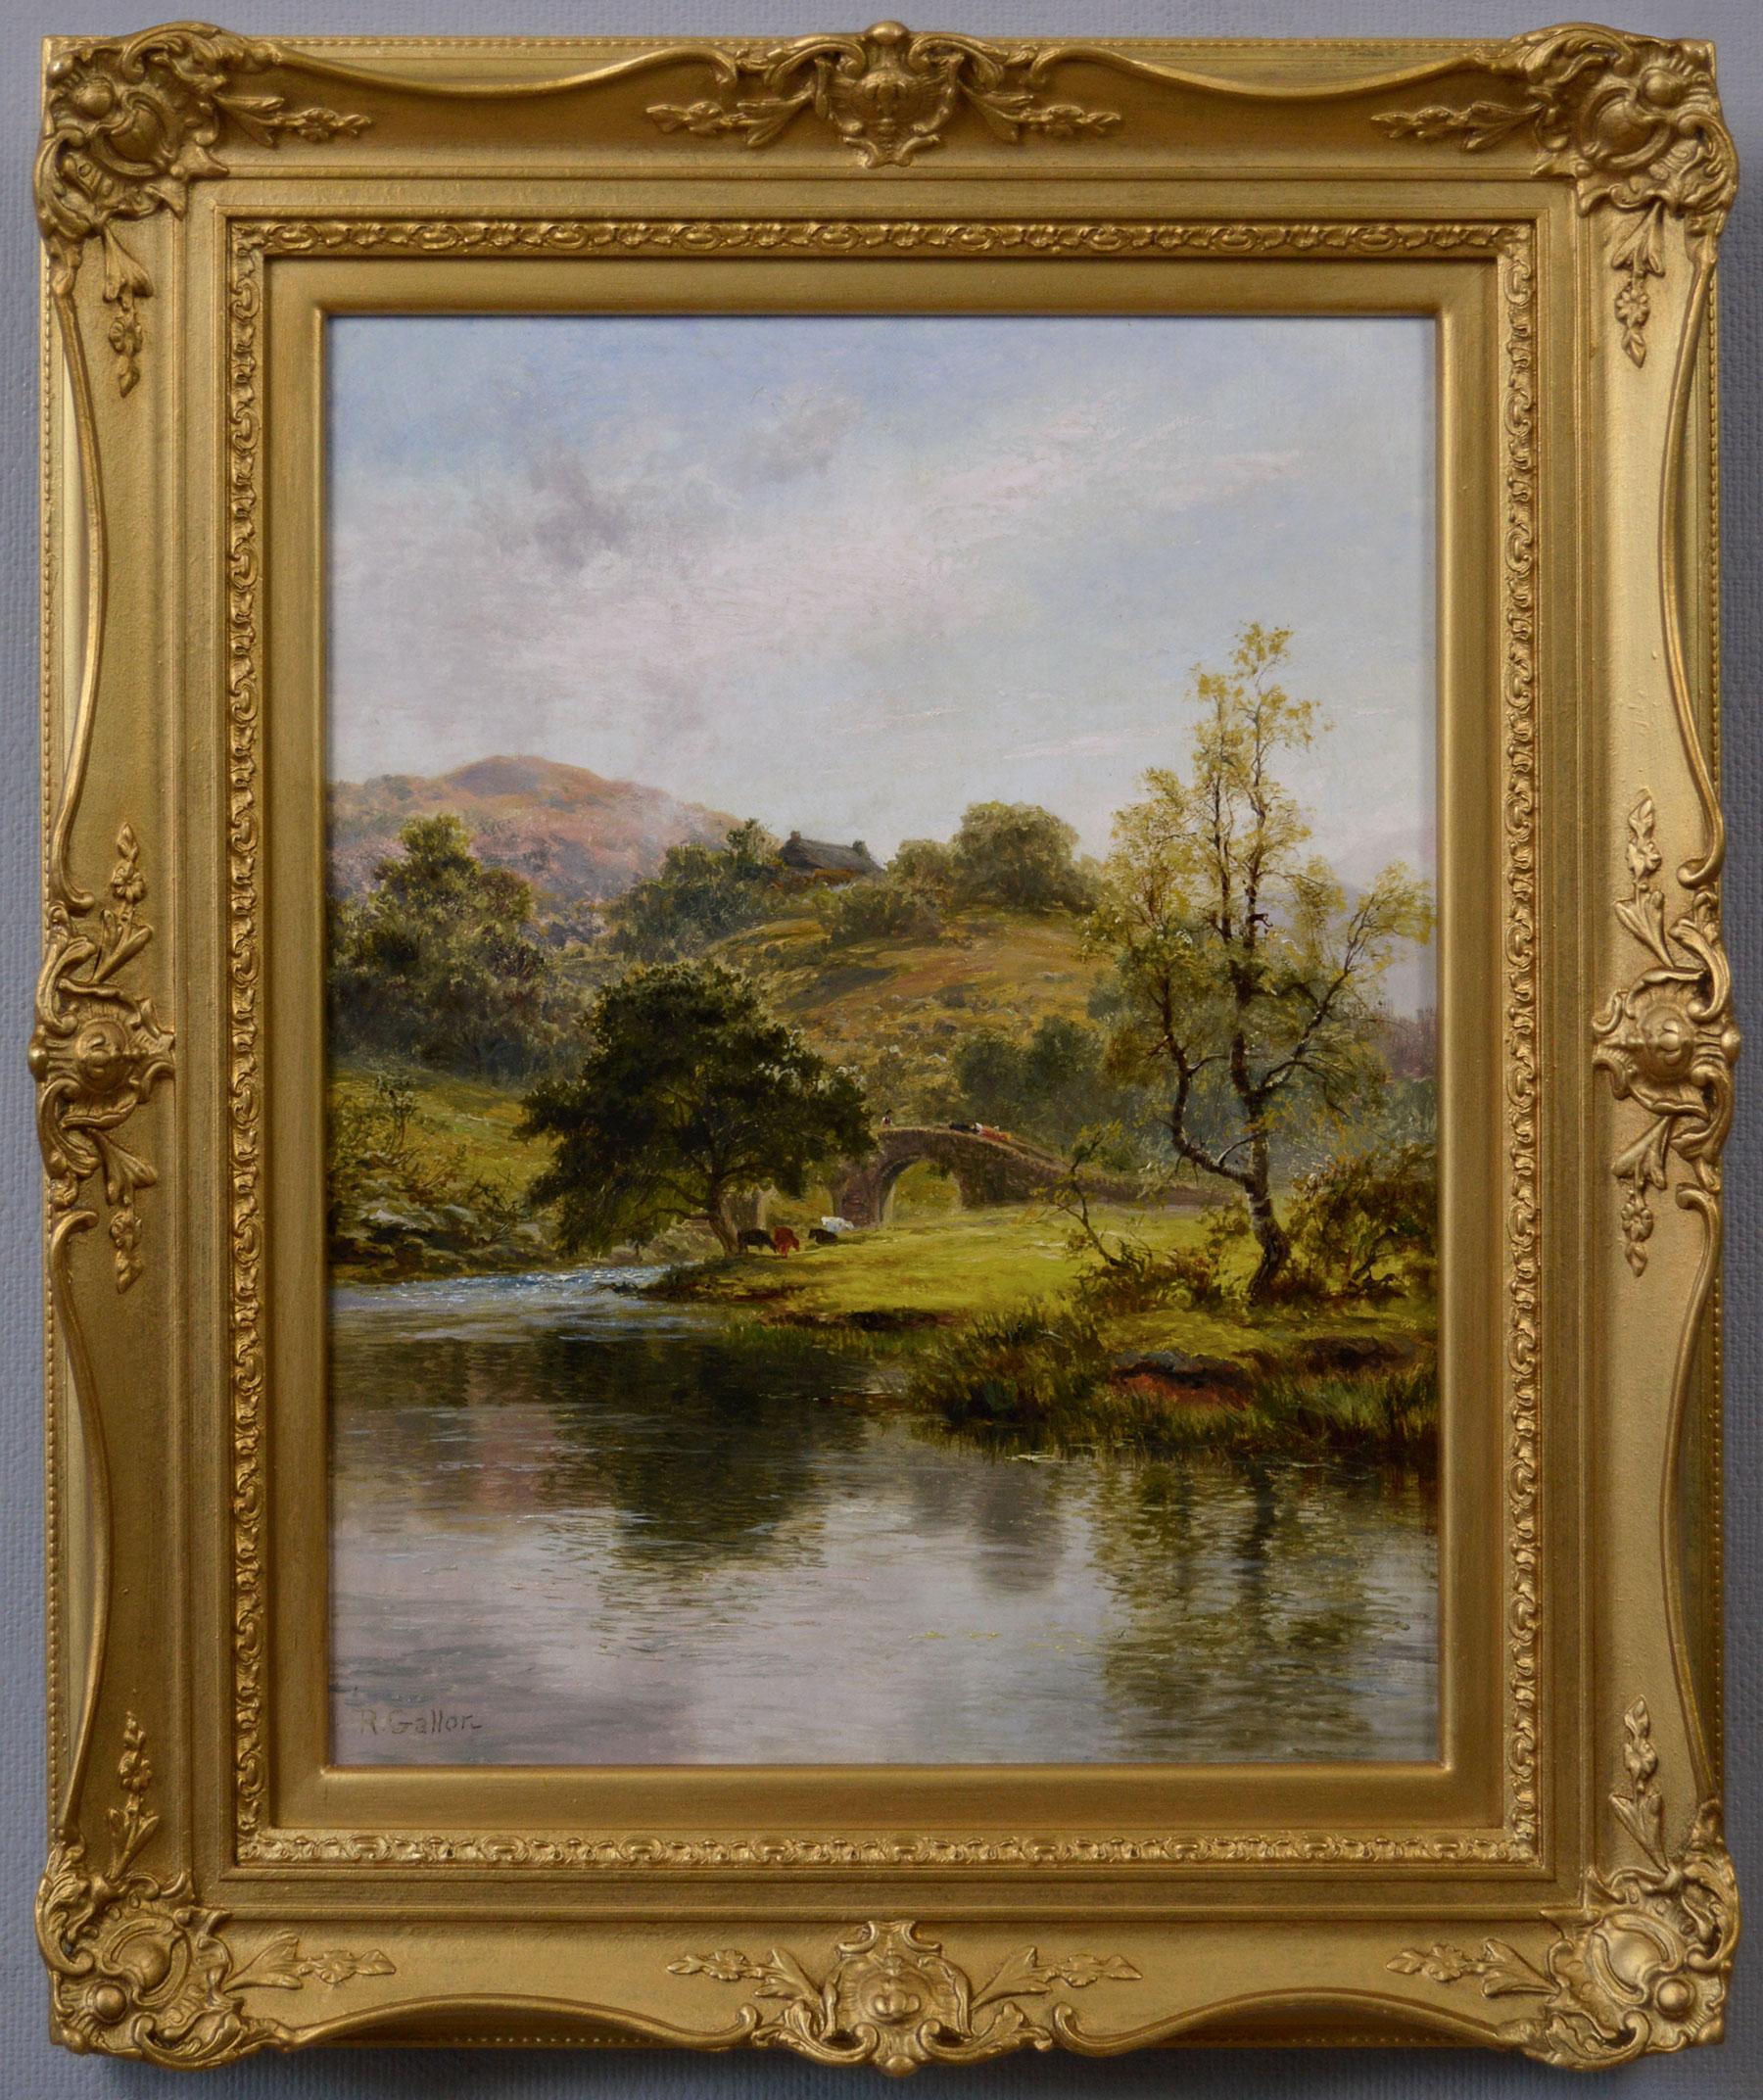 Robert Gallon Animal Painting - 19th Century landscape oil painting of cattle at a river 